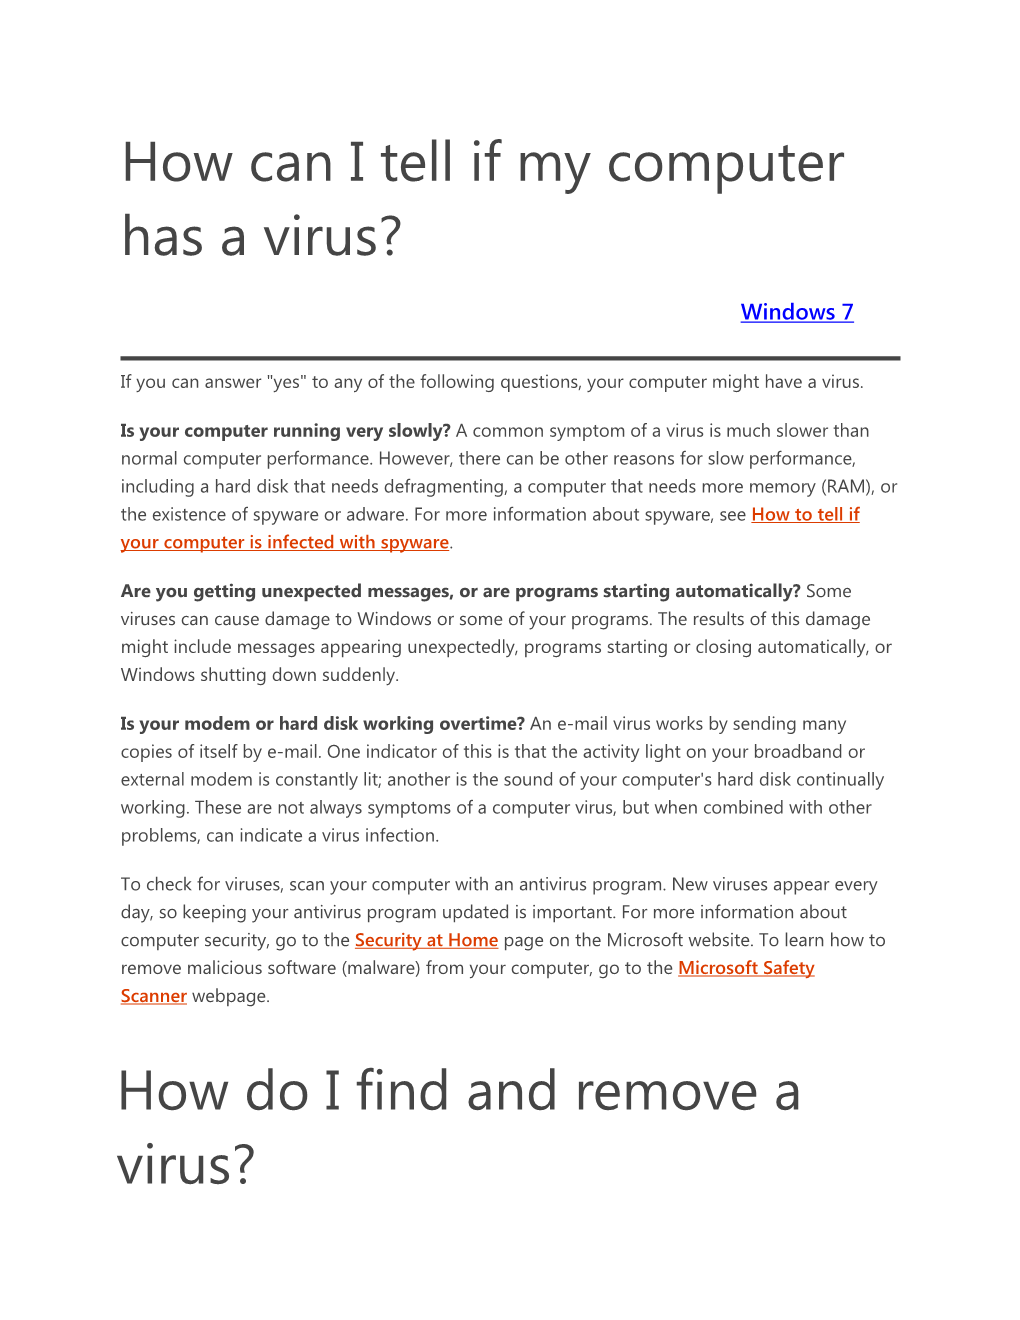 How Can I Tell If My Computer Has a Virus? How Do I Find and Remove